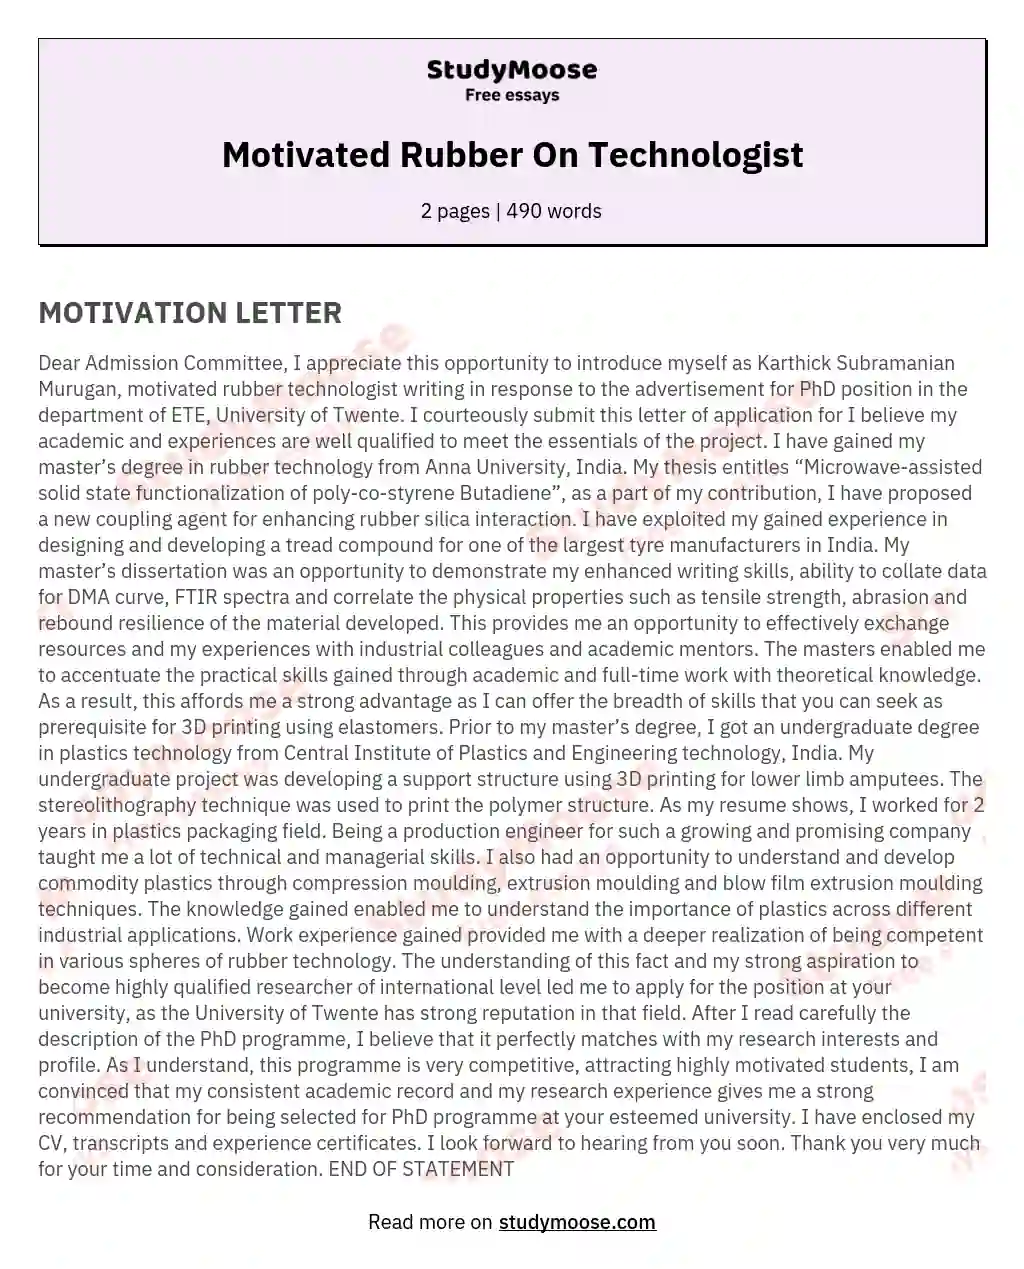 Motivated Rubber On Technologist essay